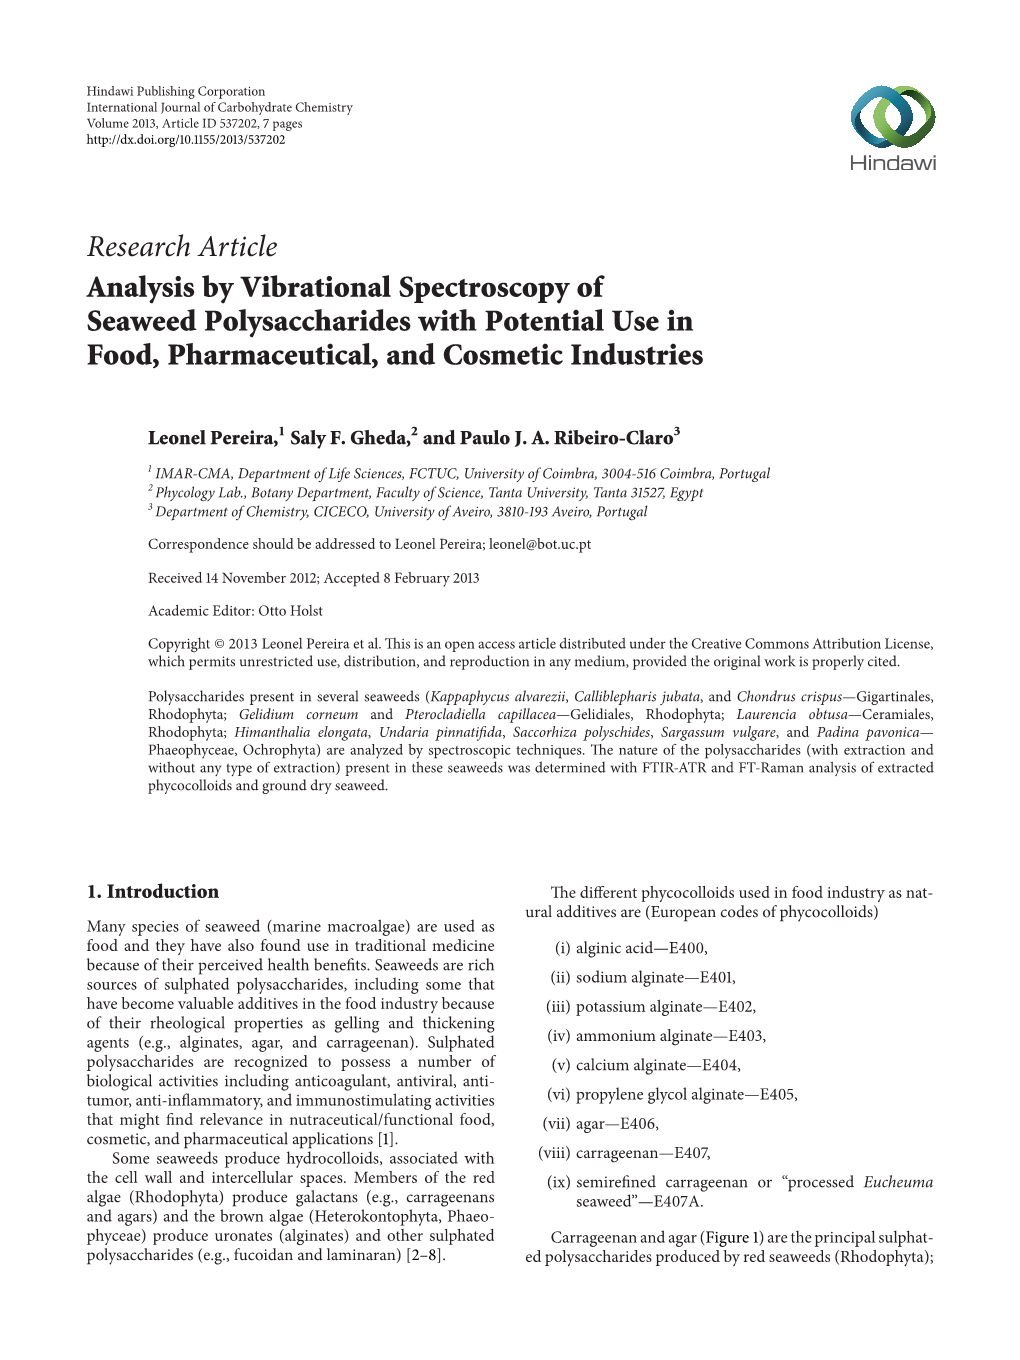 Research Article Analysis by Vibrational Spectroscopy of Seaweed Polysaccharides with Potential Use in Food, Pharmaceutical, and Cosmetic Industries